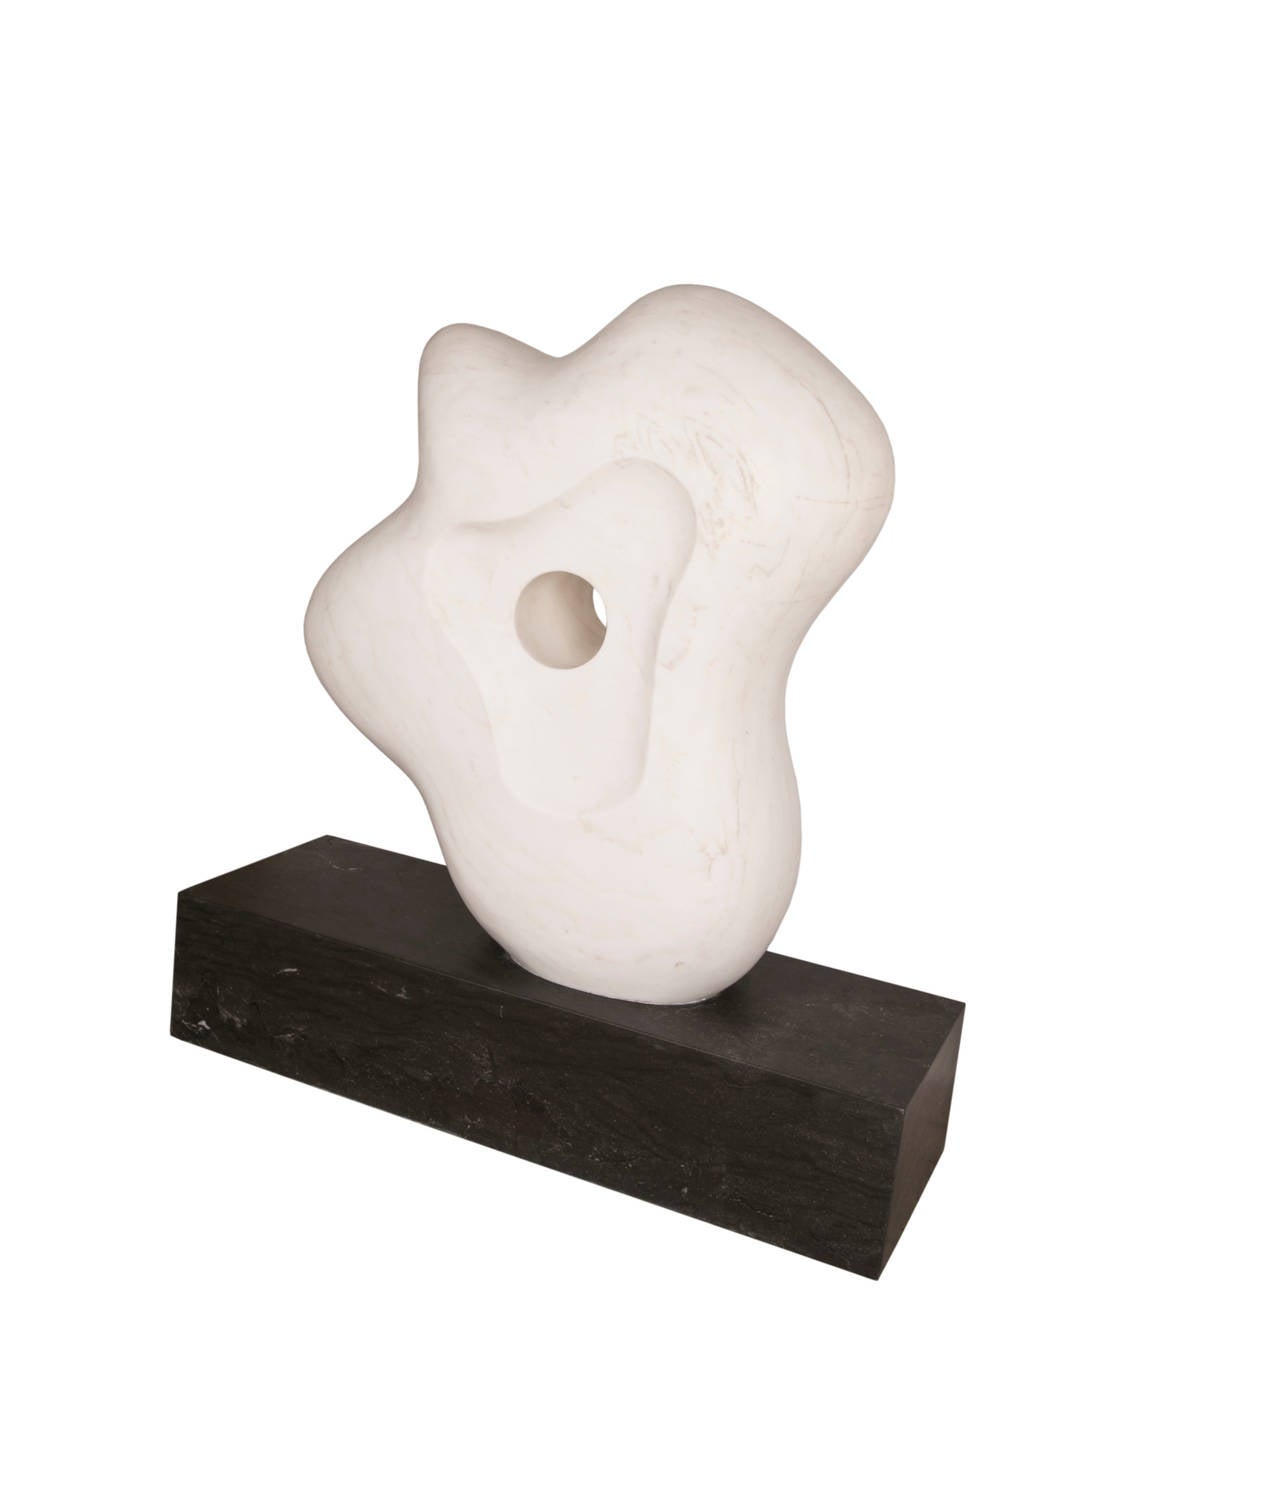 This artisanal sculpture is an exotic piece of modern art and a vibrant home or outdoor accessory. Hand-carved from honed white calcutta and negro marquina marble, the sweeping lines of this monolithic piece add an elevated flourish to any space.